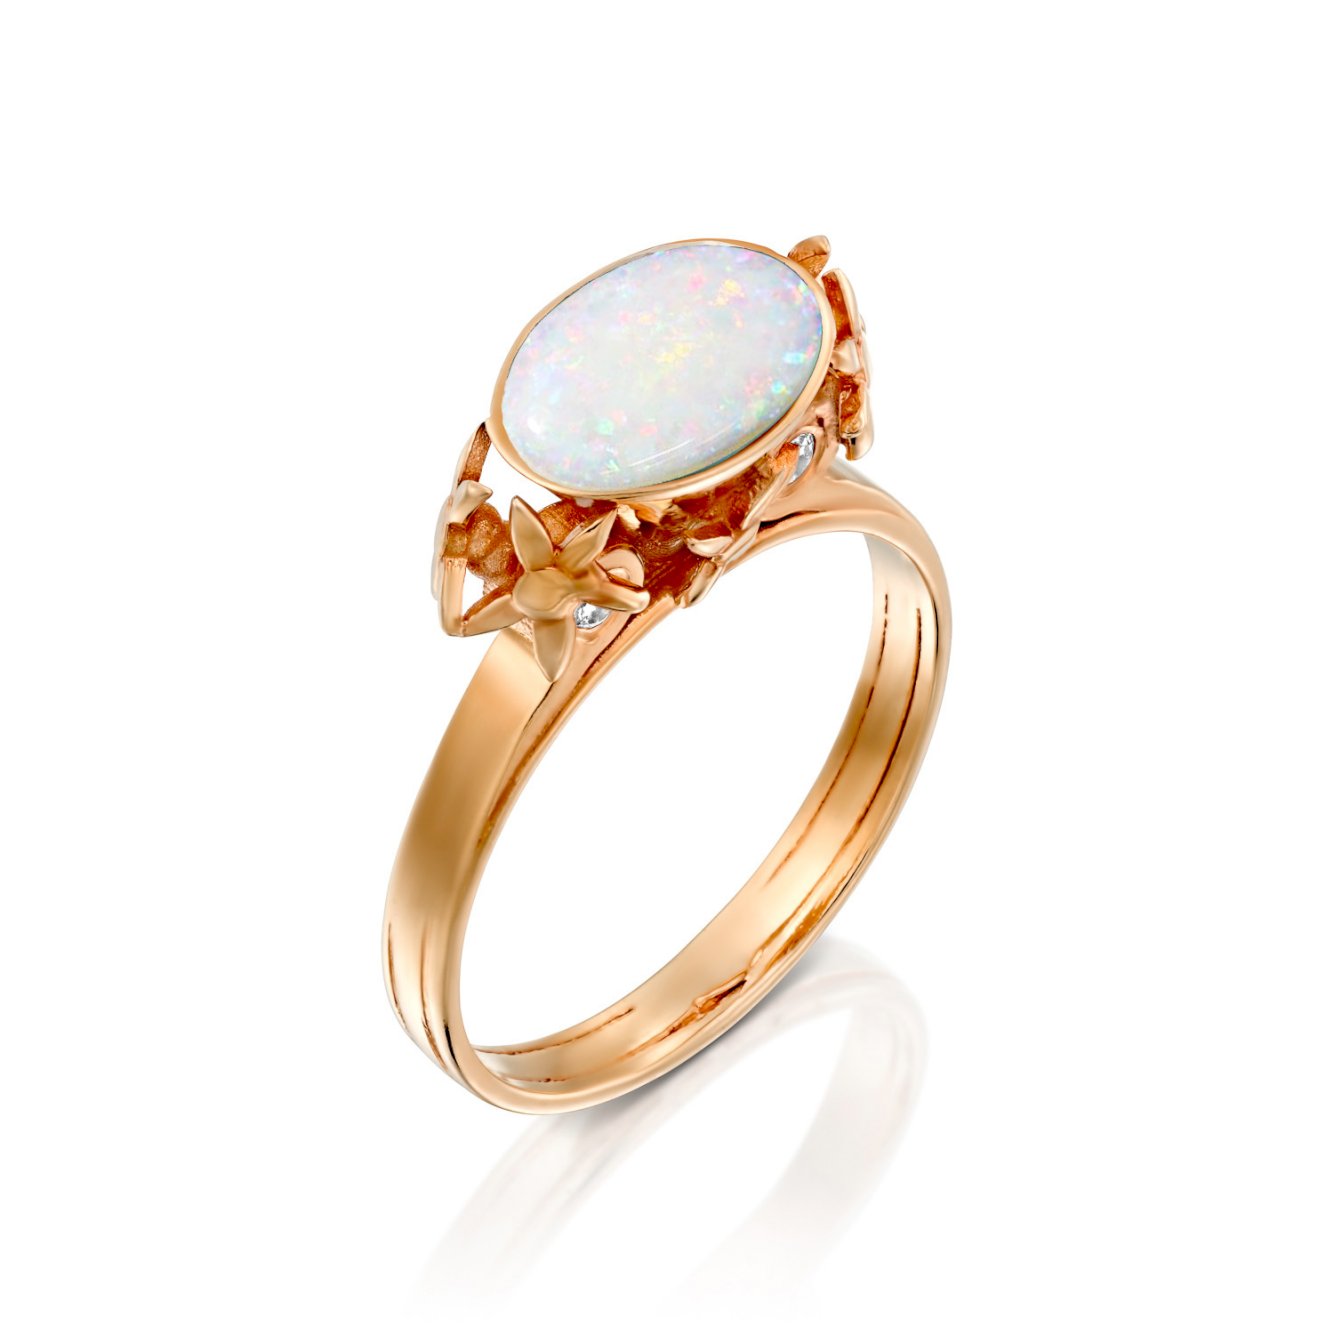 Australian Opal engagement ring set with diamonds- Floral Ring